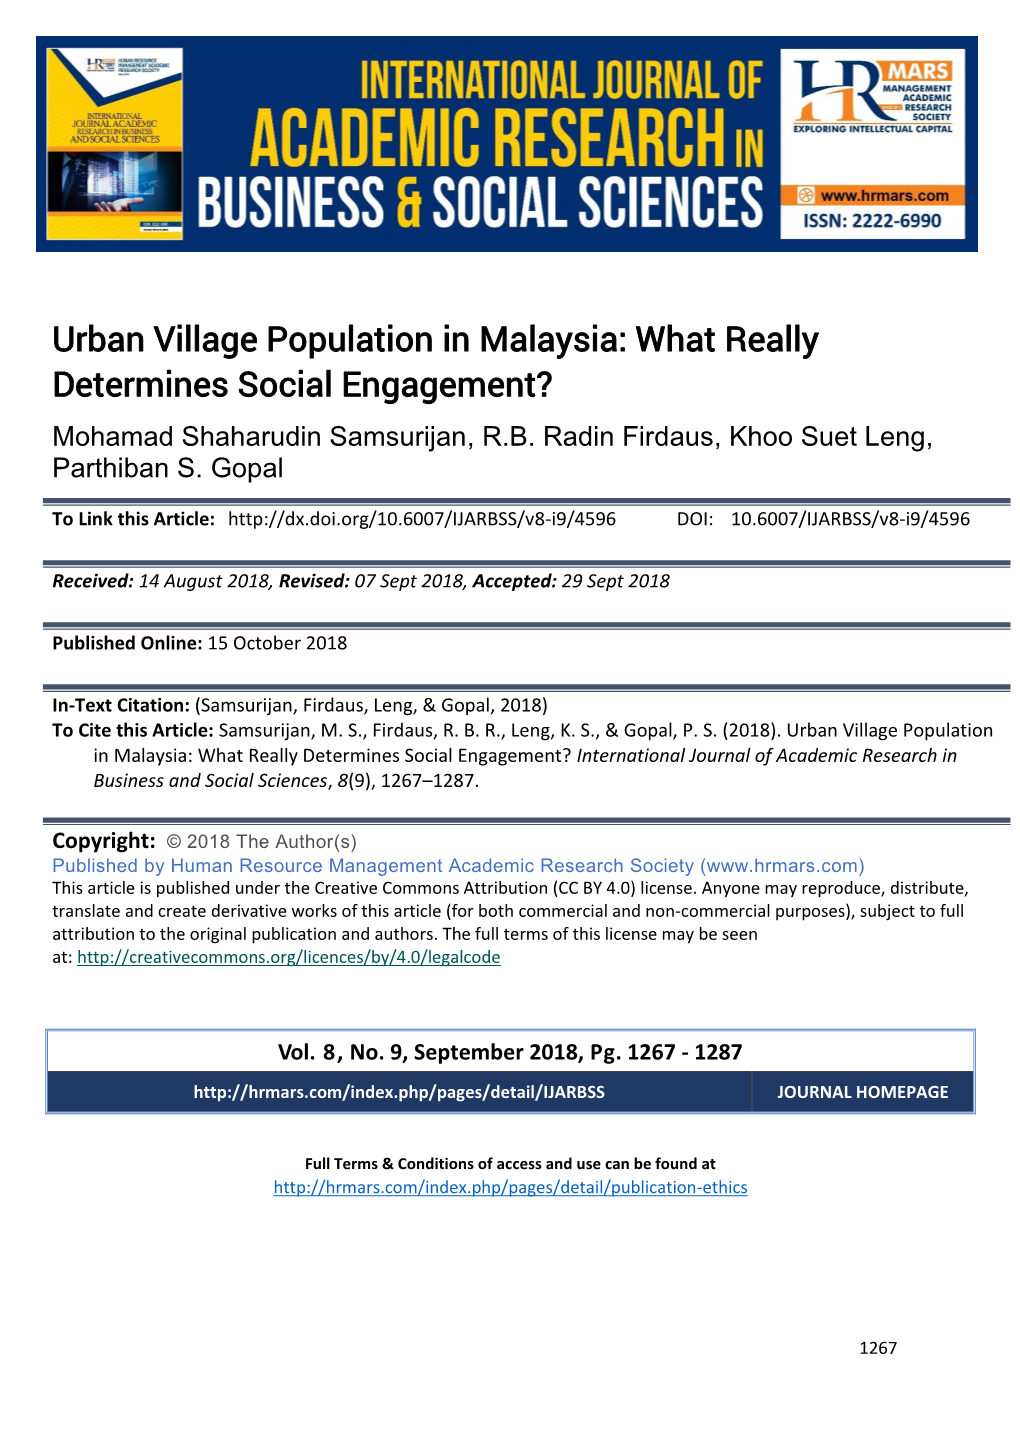 Urban Village Population in Malaysia: What Really Determines Social Engagement?